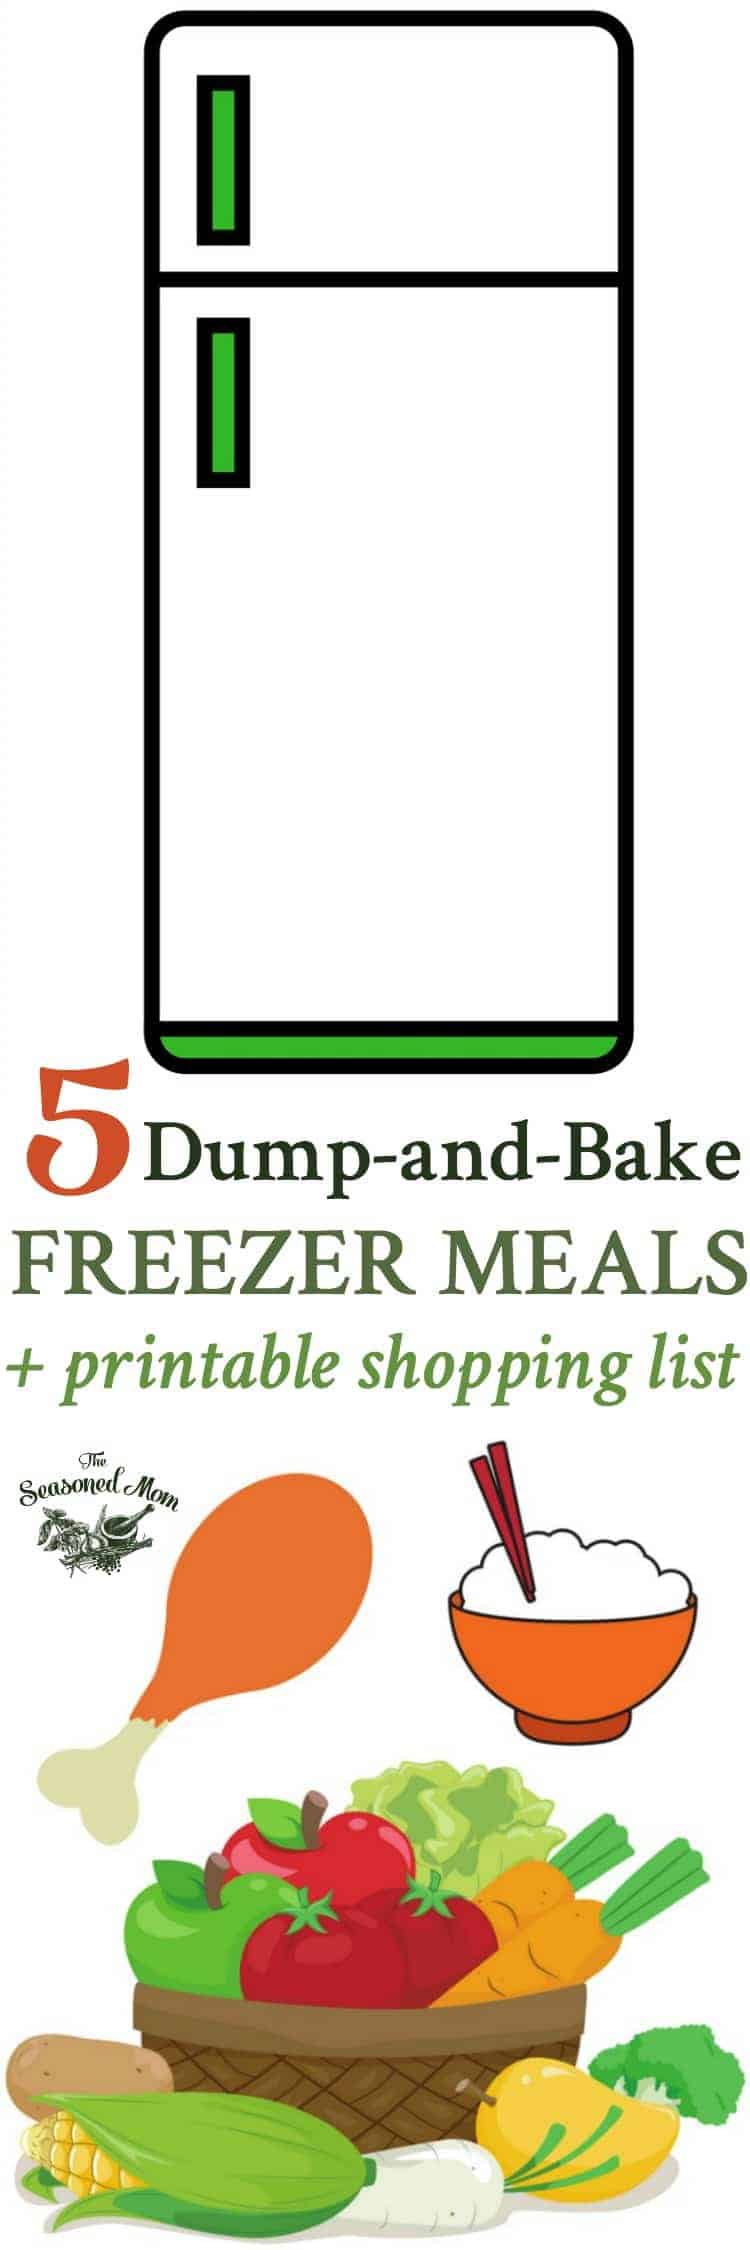 5 Dump-and-Bake Freezer Meals! Meal Prep | Easy Dinner Recipes | Dinner Ideas | Meal Prep Recipes | Meal Planning 